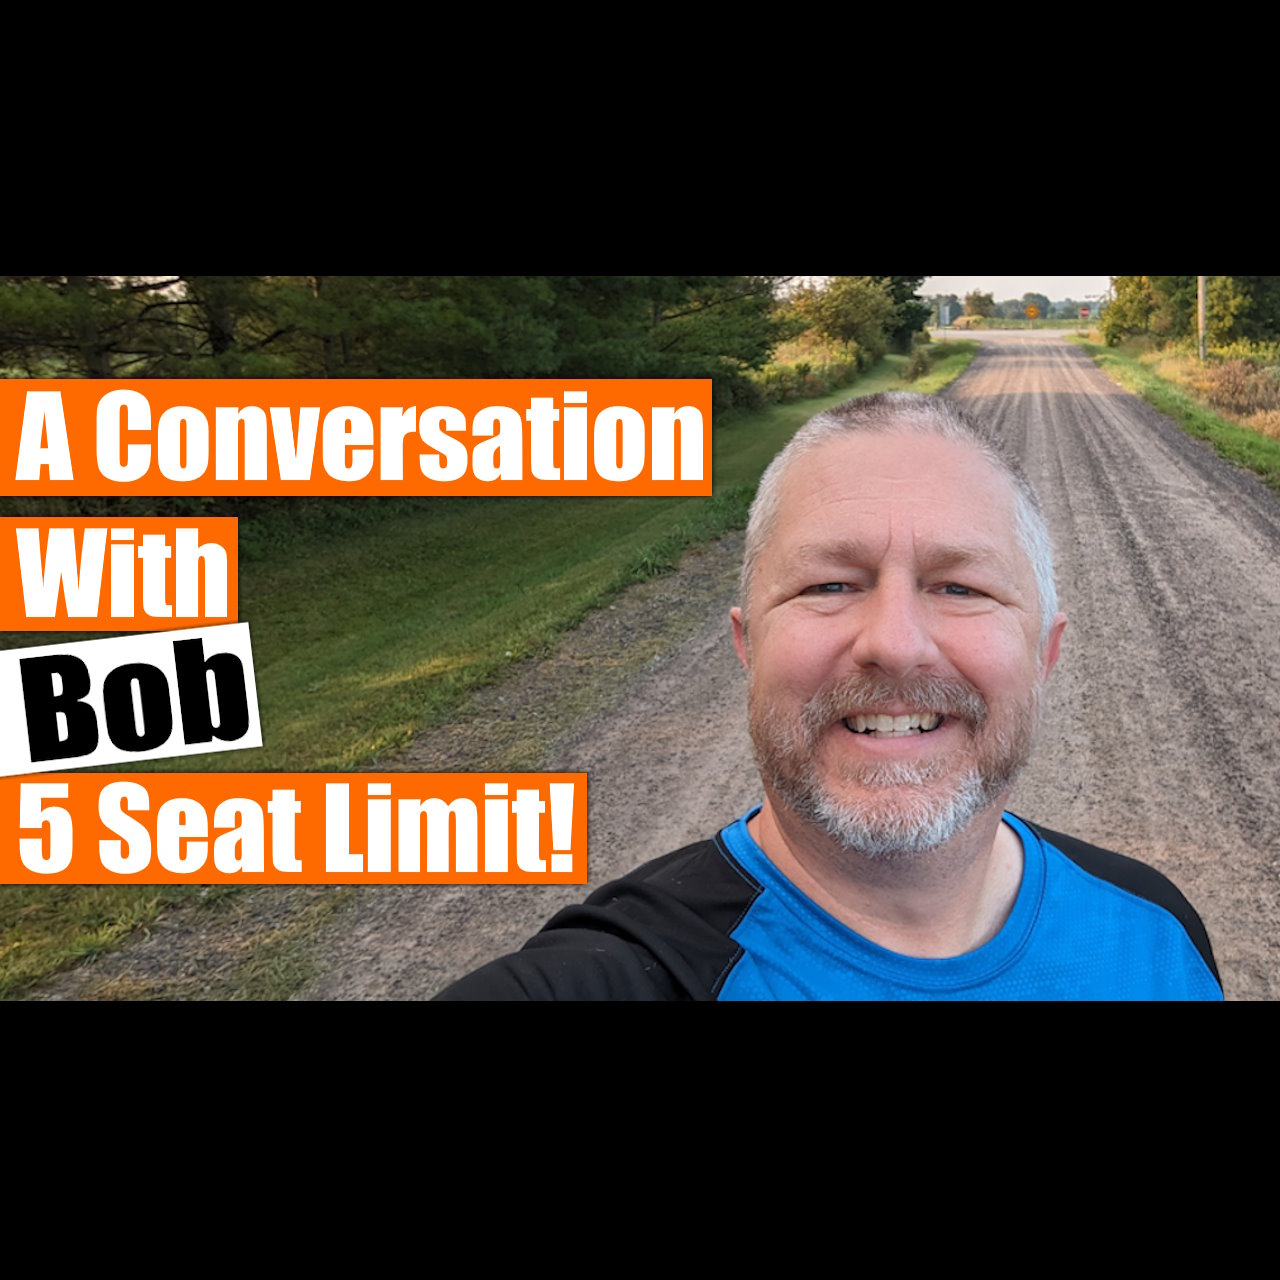 A Conversation with Bob - Saturday September 9 - 7:30 AM Eastern Standard Time - 5 Person Limit